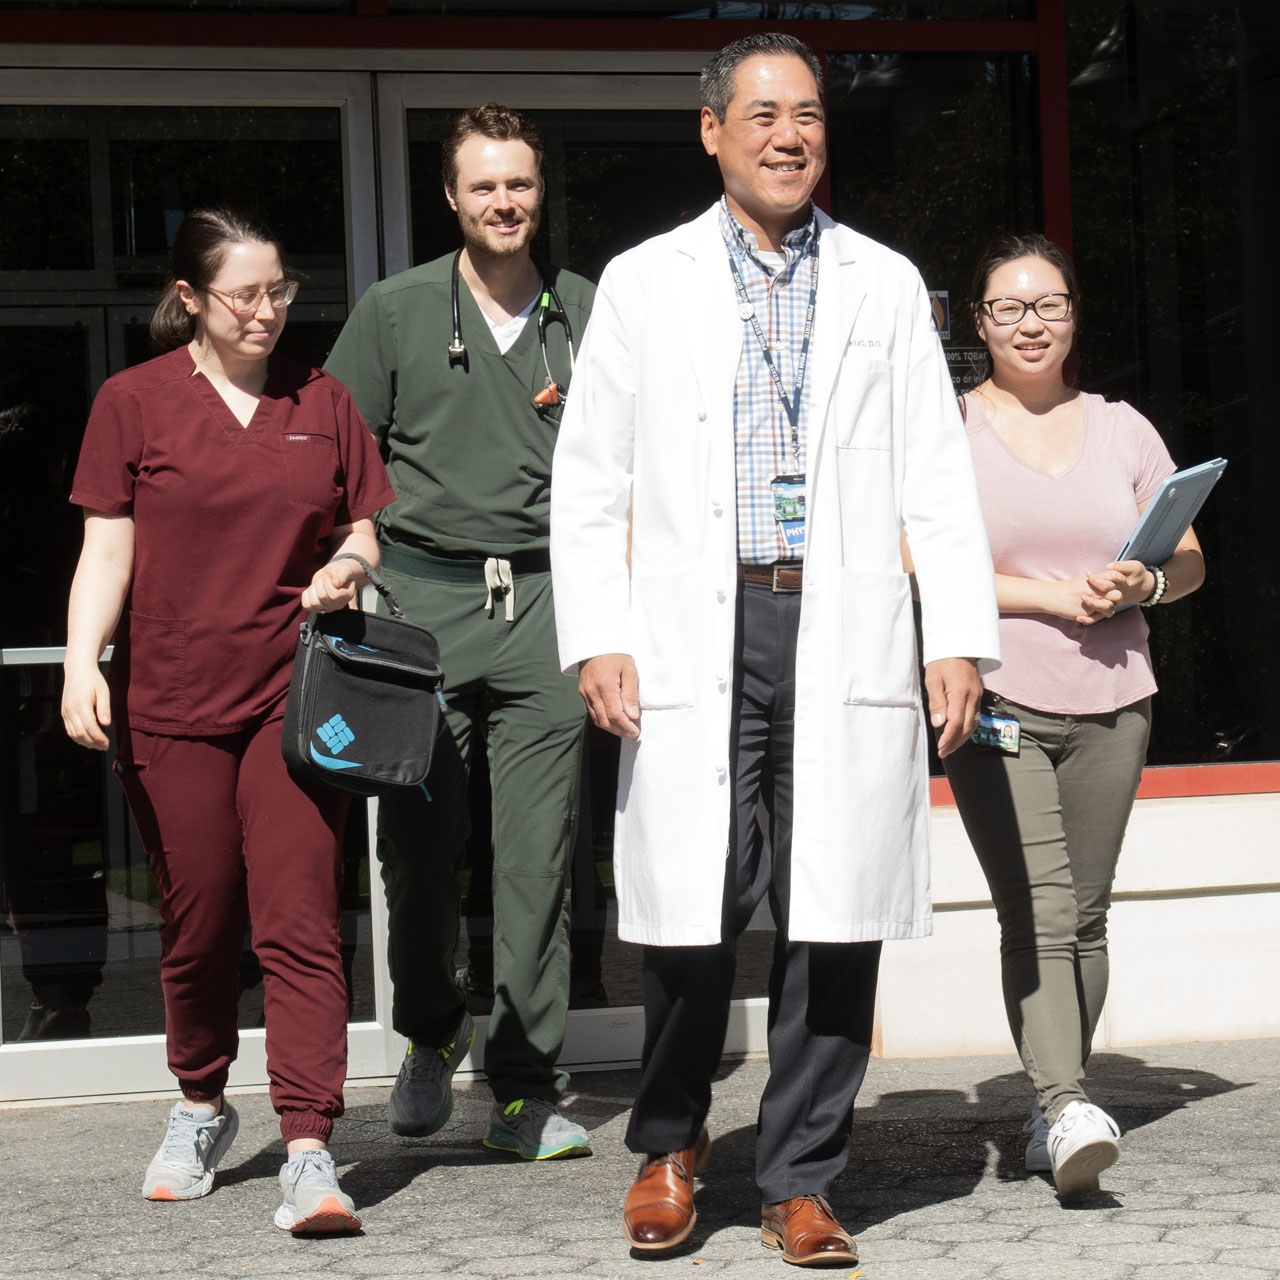 PCOM's Dr. Kuo and medical residents walk out of one of the Philadelphia campus buildings